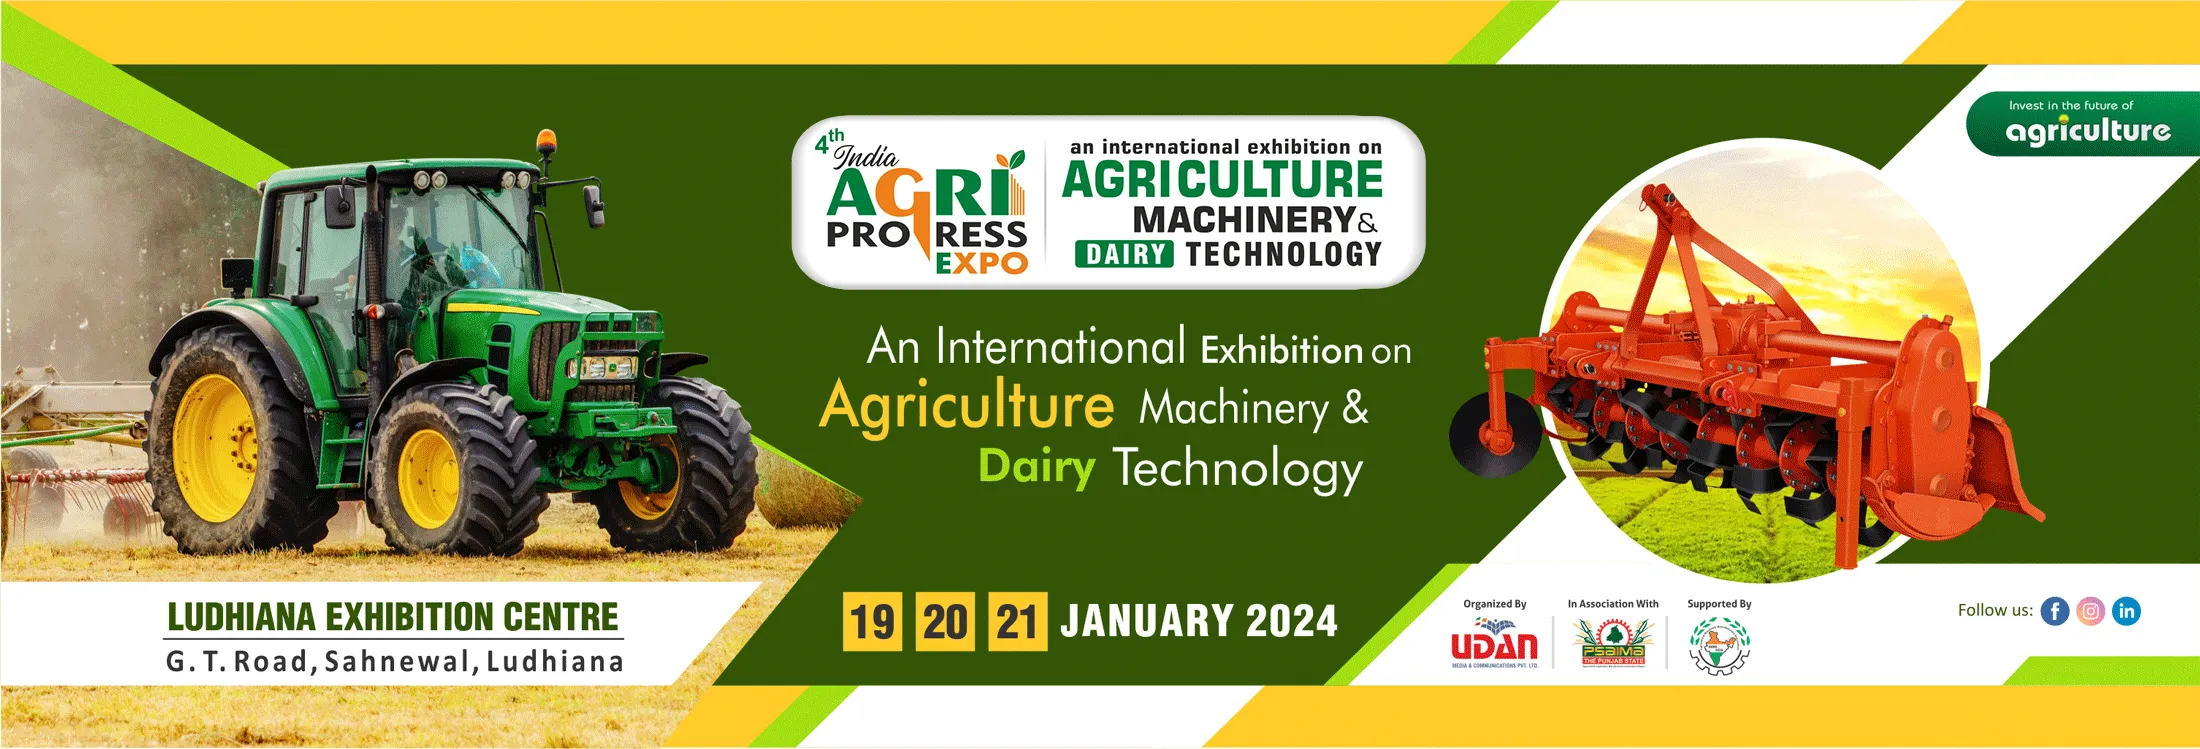 AGRI PROGRESS EXPO 2024 Agriculture & Dairy Technology Exhibition in